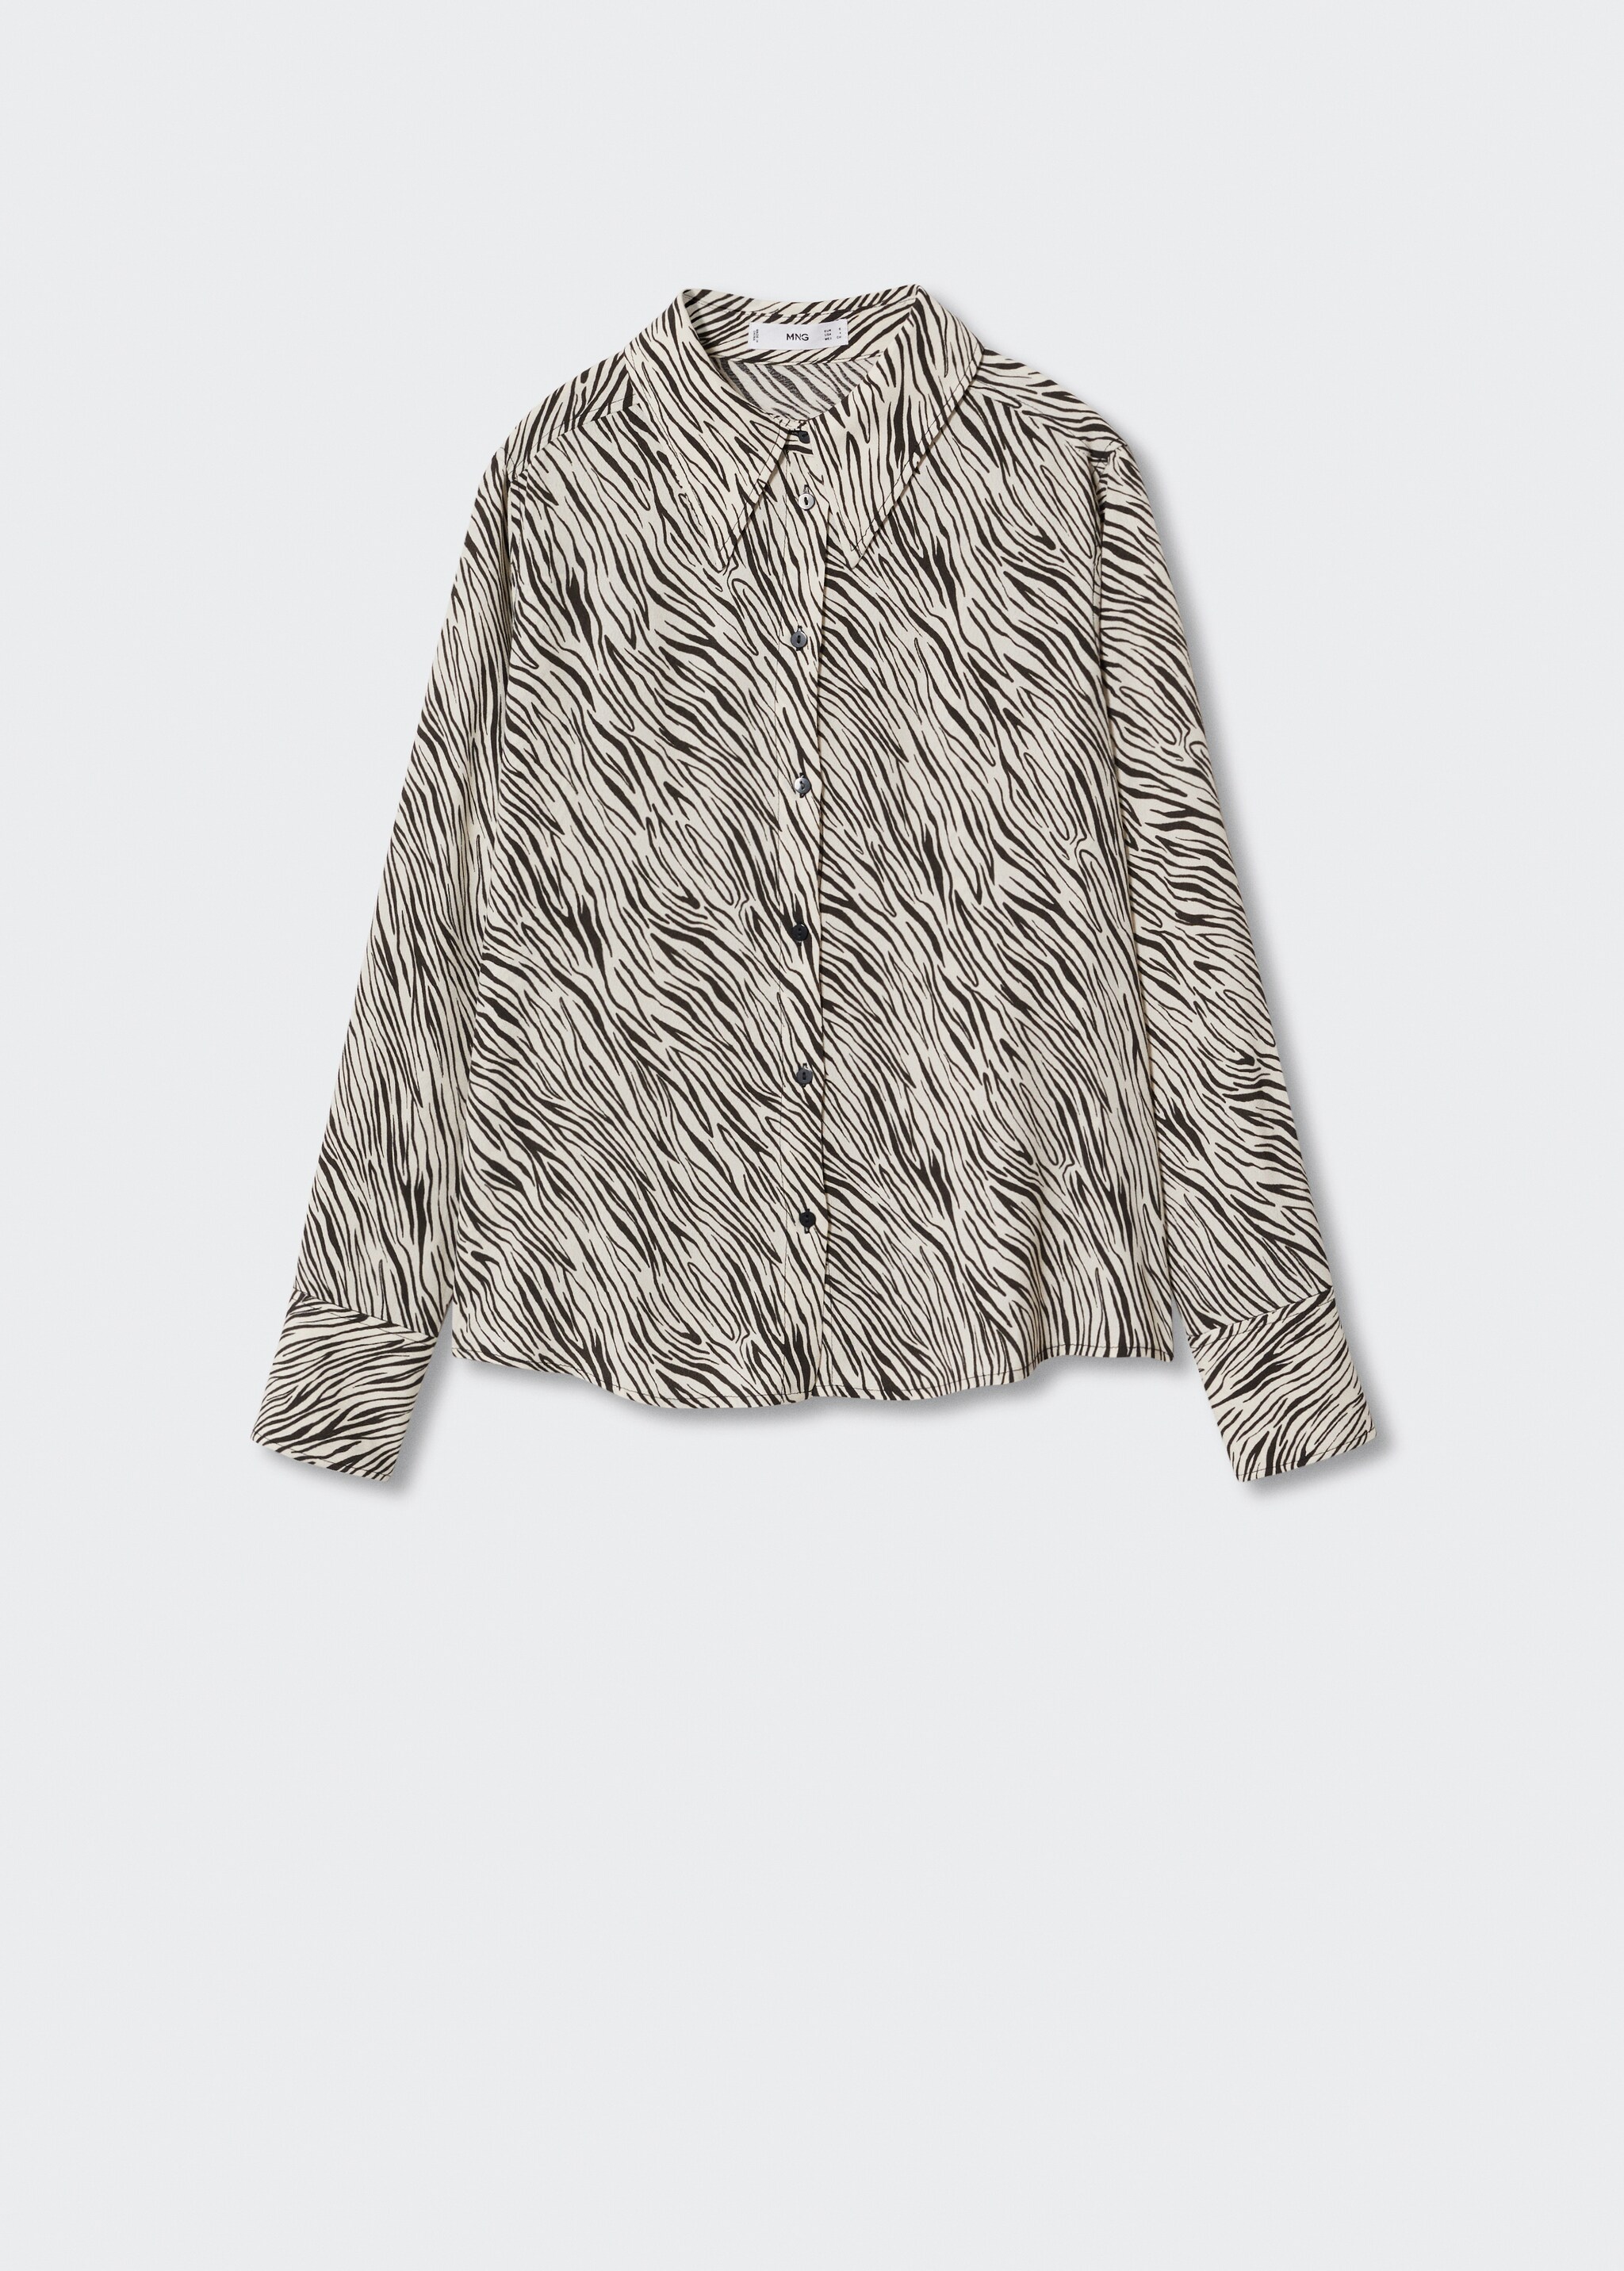 Animal print shirt - Article without model